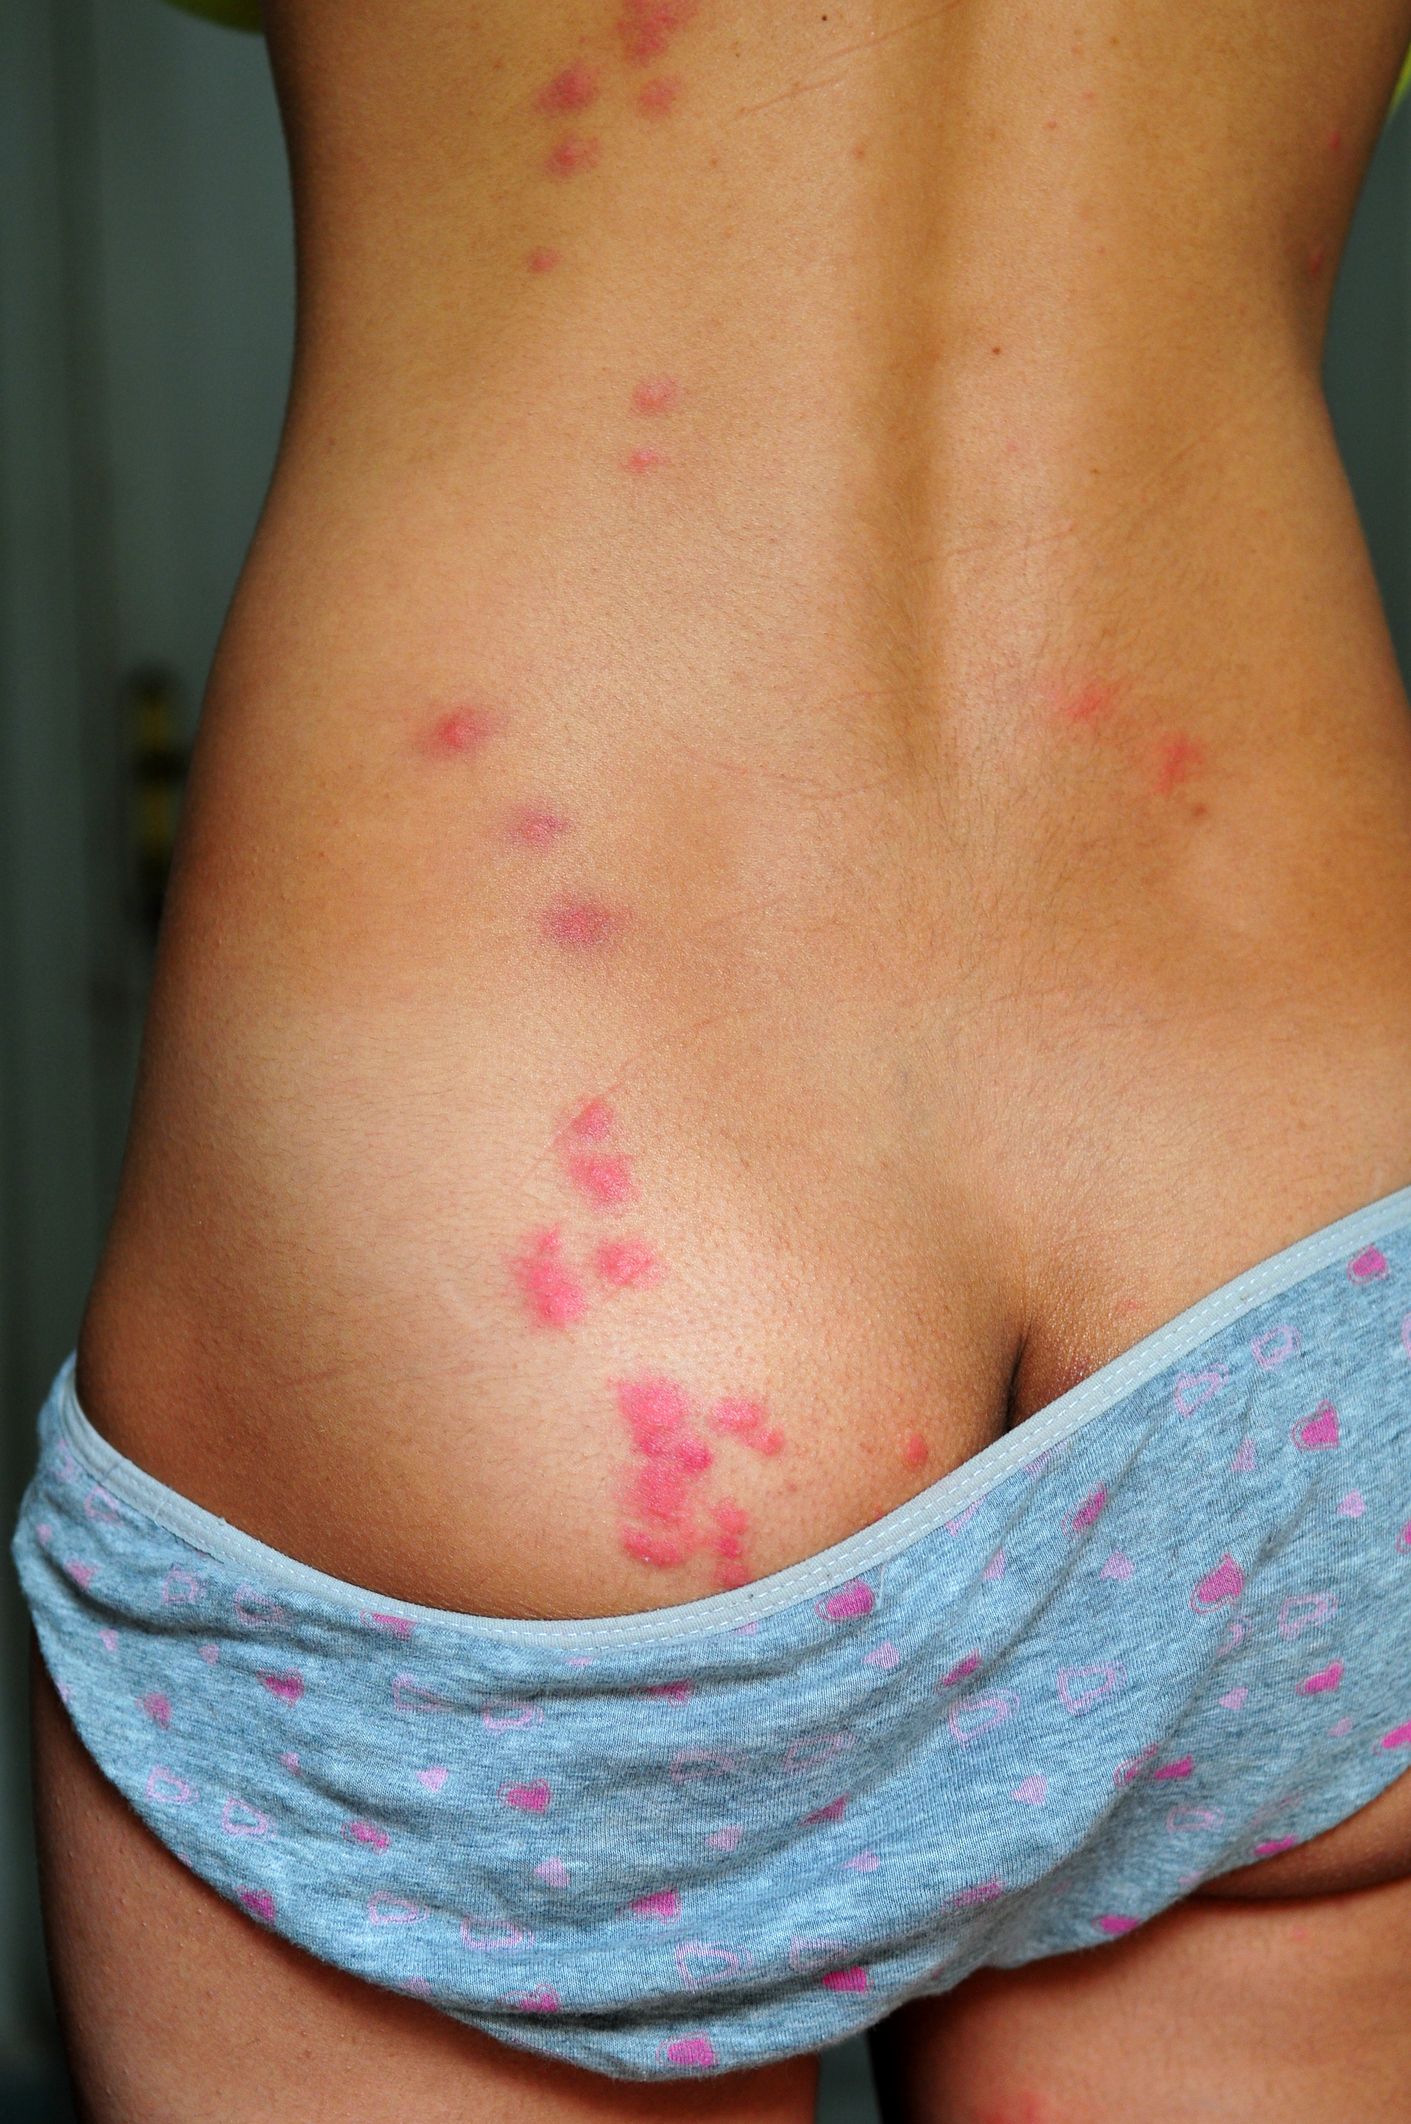 types of bug bites in bed